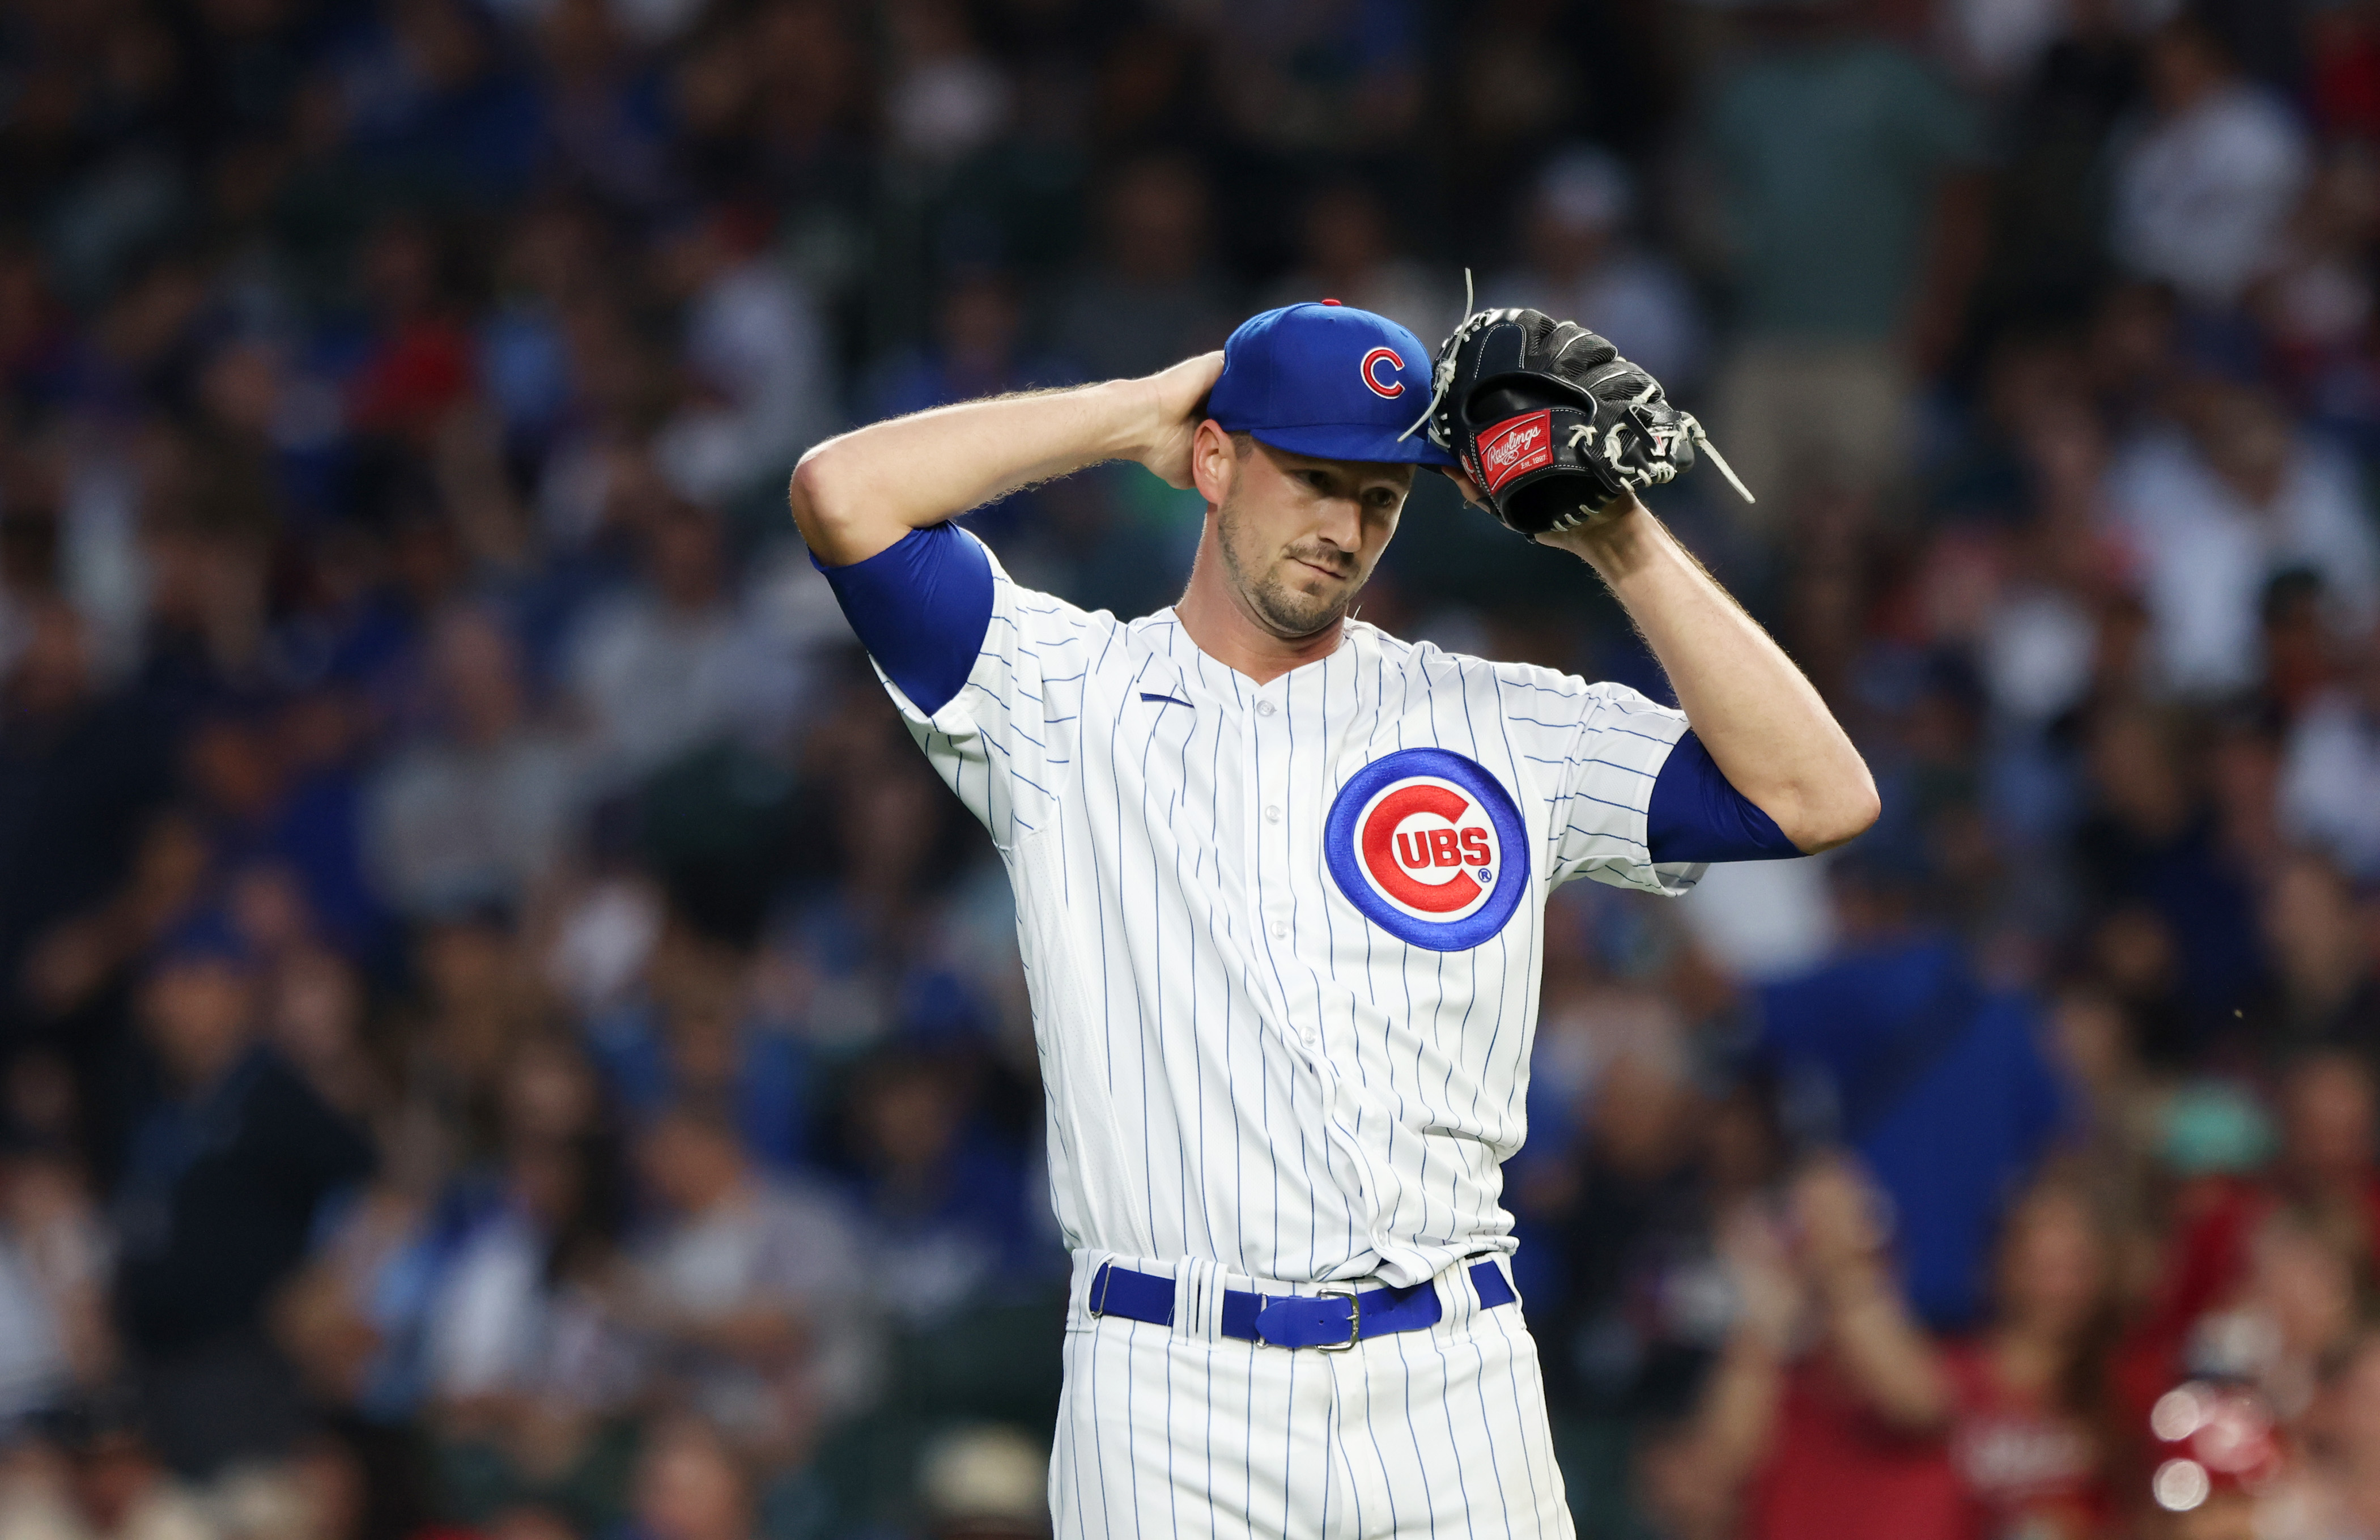 State of the Cubs' rotation heading into 2021